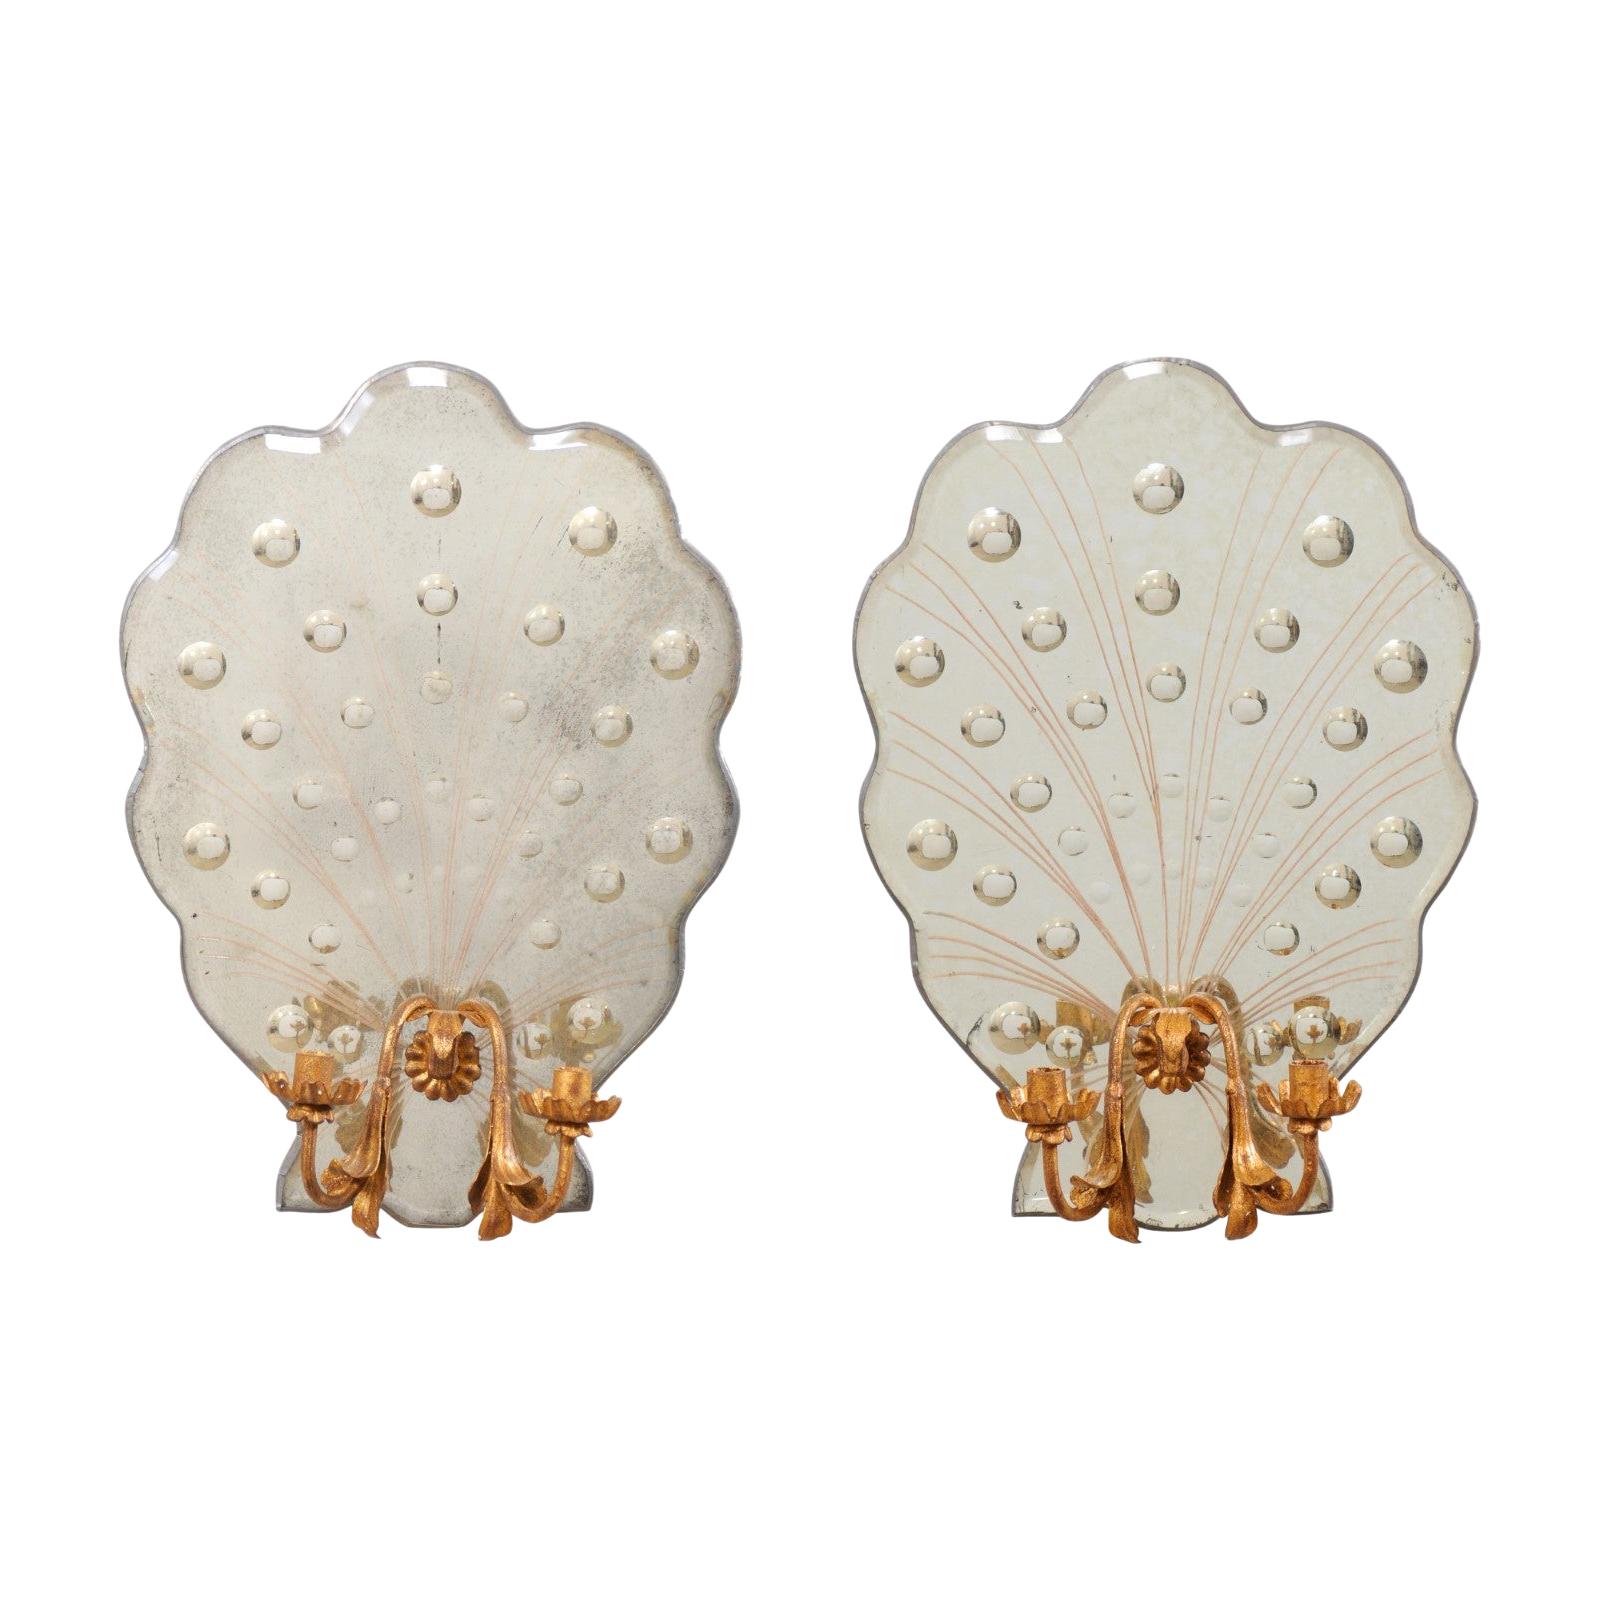 Pair of Art Deco Style Candle Sconces with Shell-Shapes & Flirty Bubble Mirrors